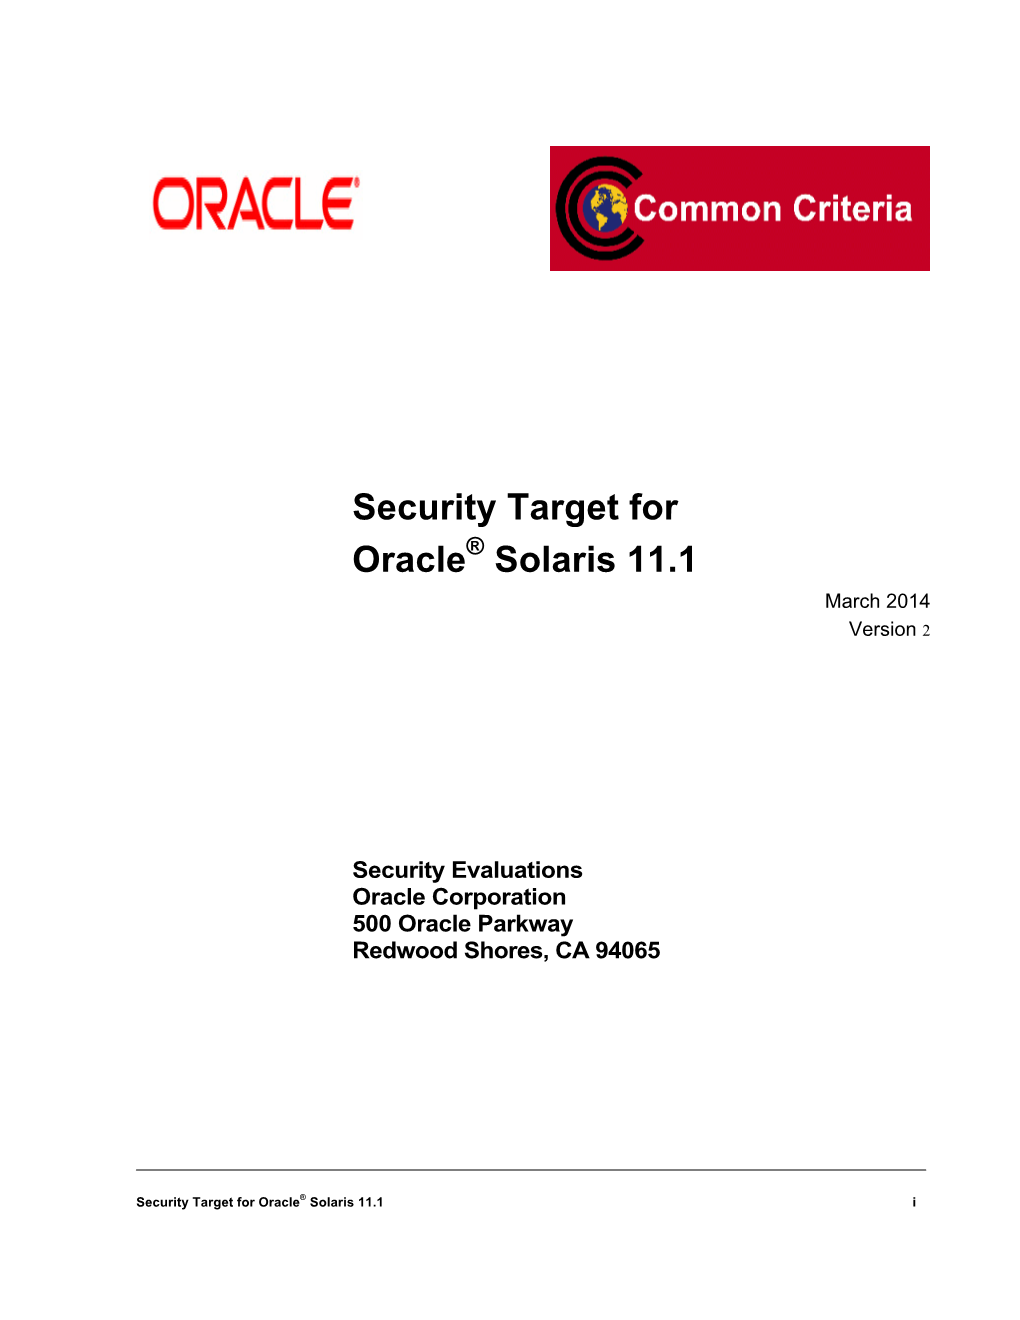 Security Target for Oracle Solaris 11.1 Version 2